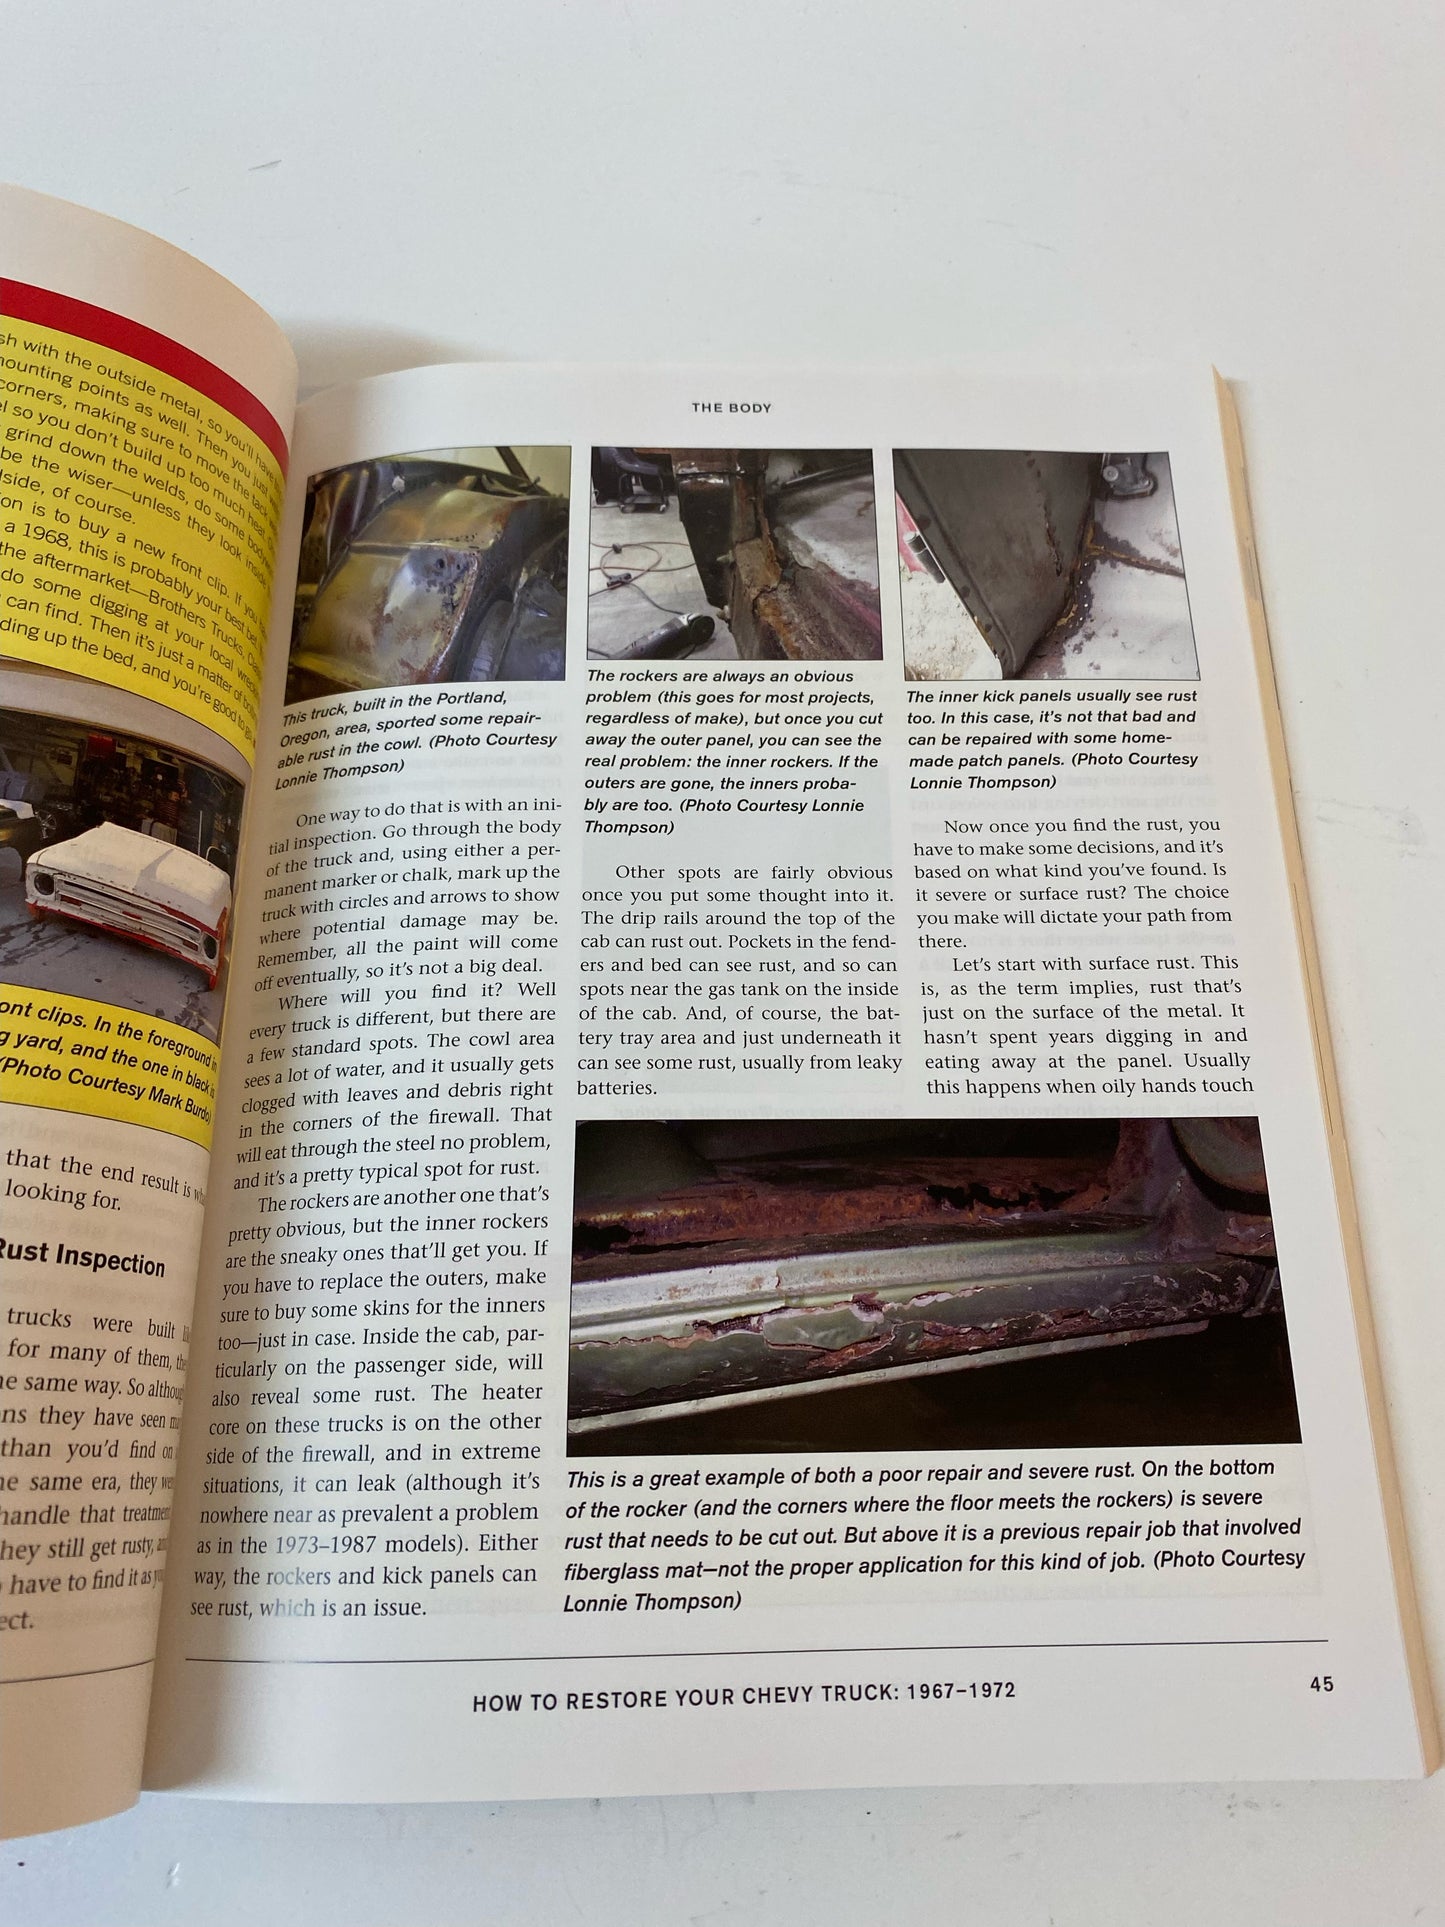 How to Restore your  1967-1972 Chevy Truck Restoration Guide